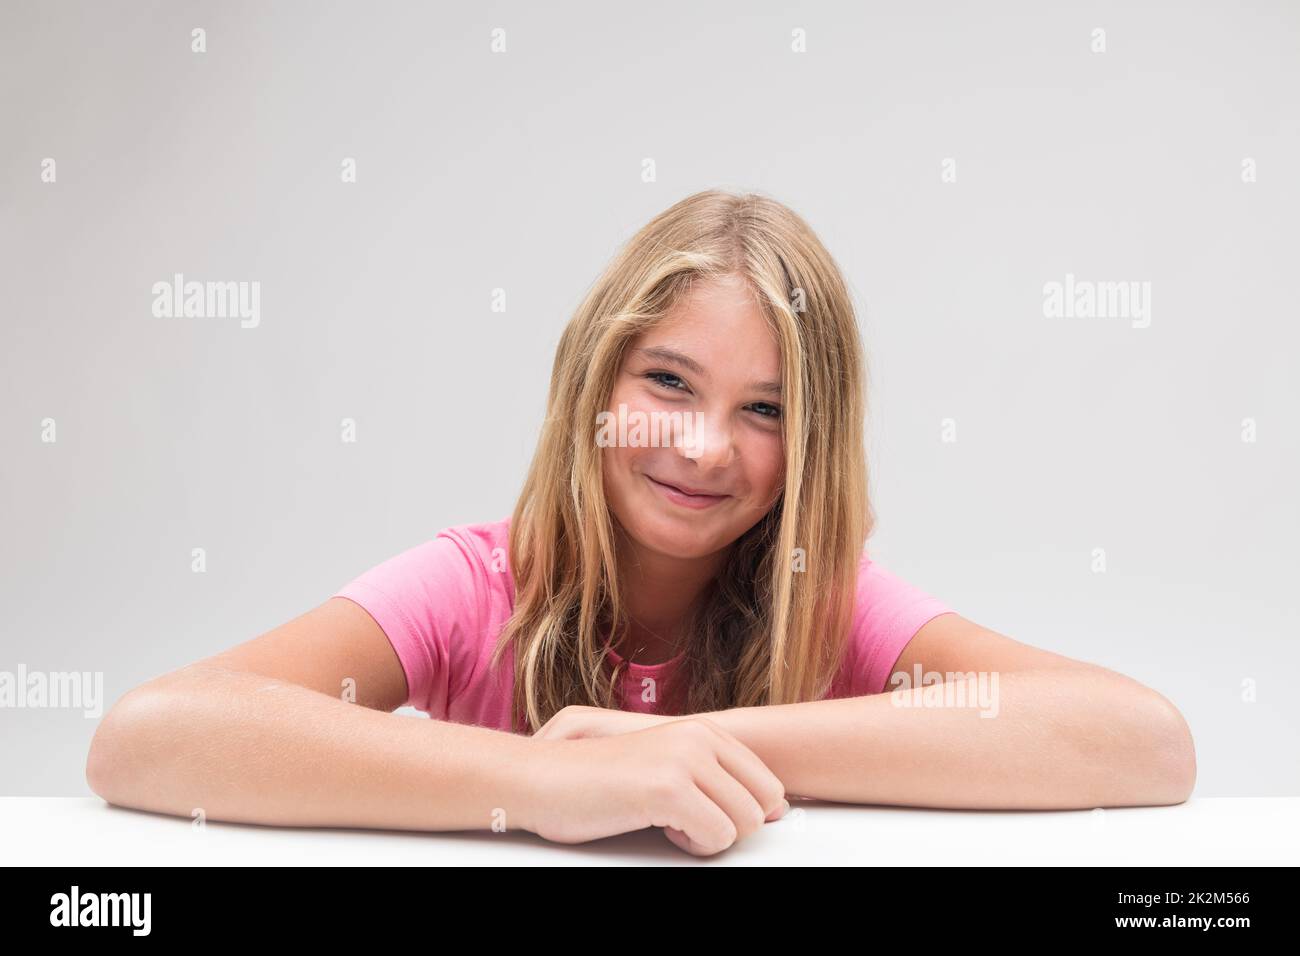 little girl grinning trying not to laugh Stock Photo